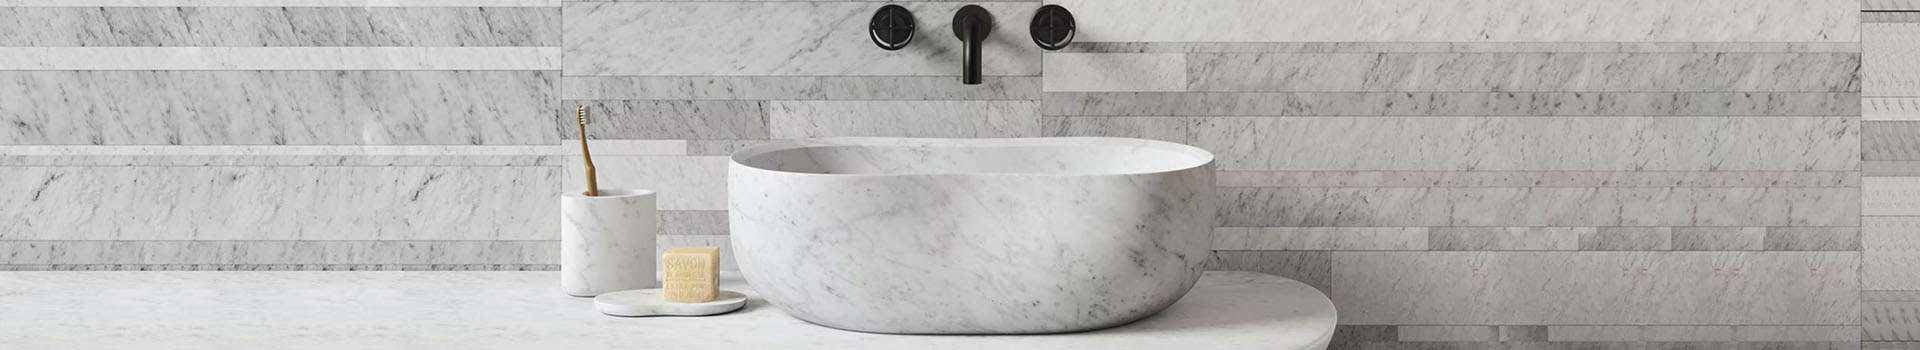 Painting Cultured Marble Sink